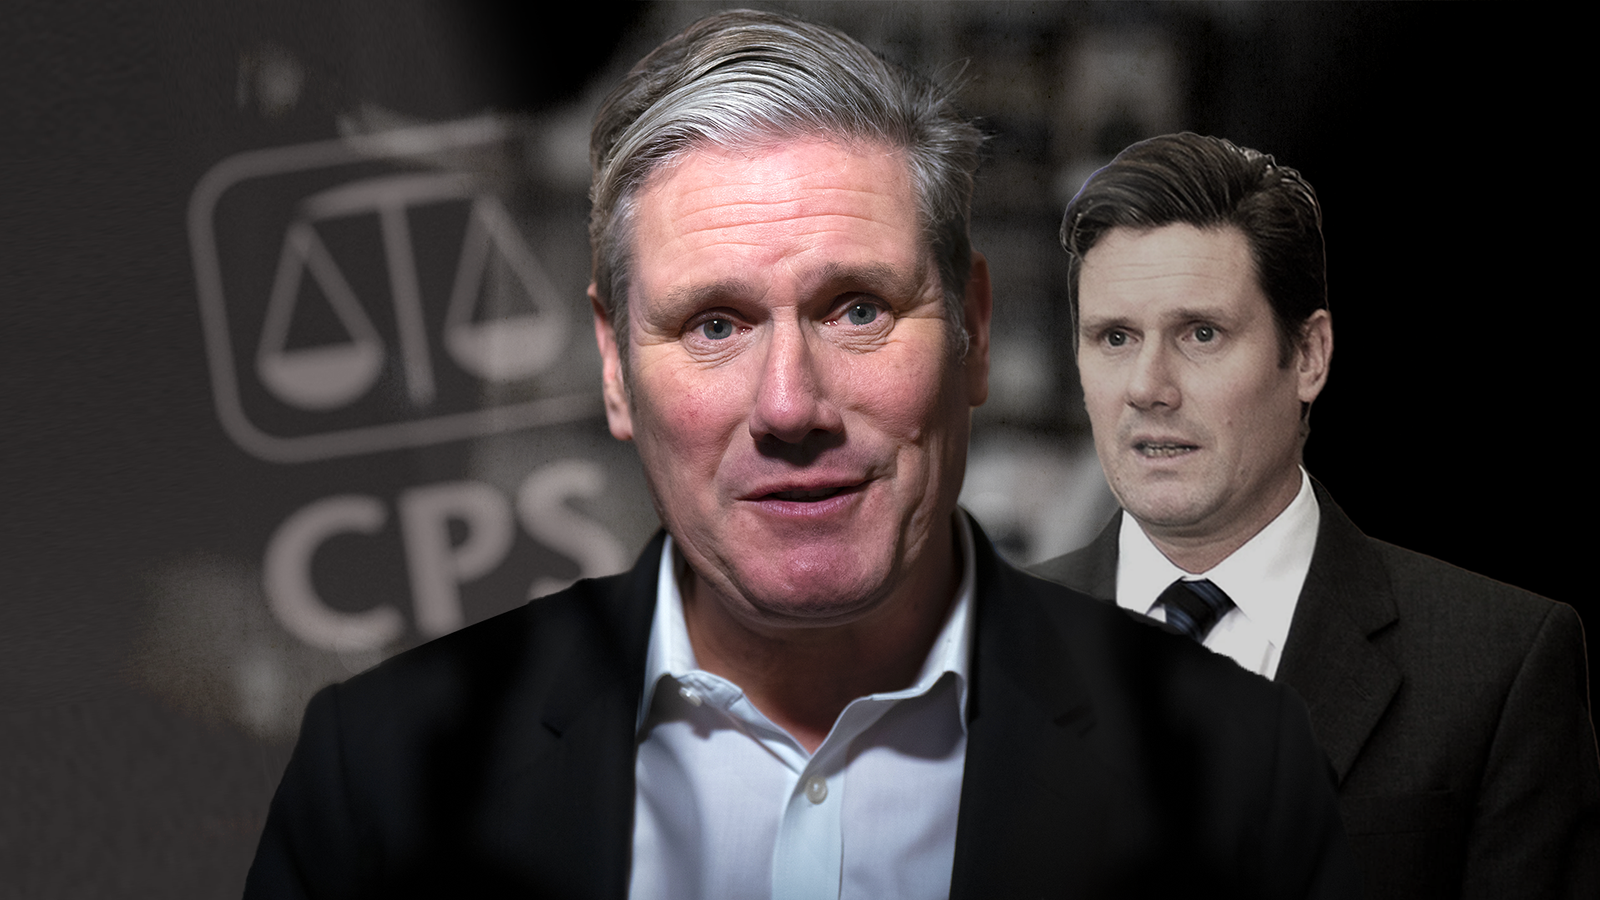 Labour insiders fear Starmer's past could come back to haunt him as Tories plan to ramp up attacks 